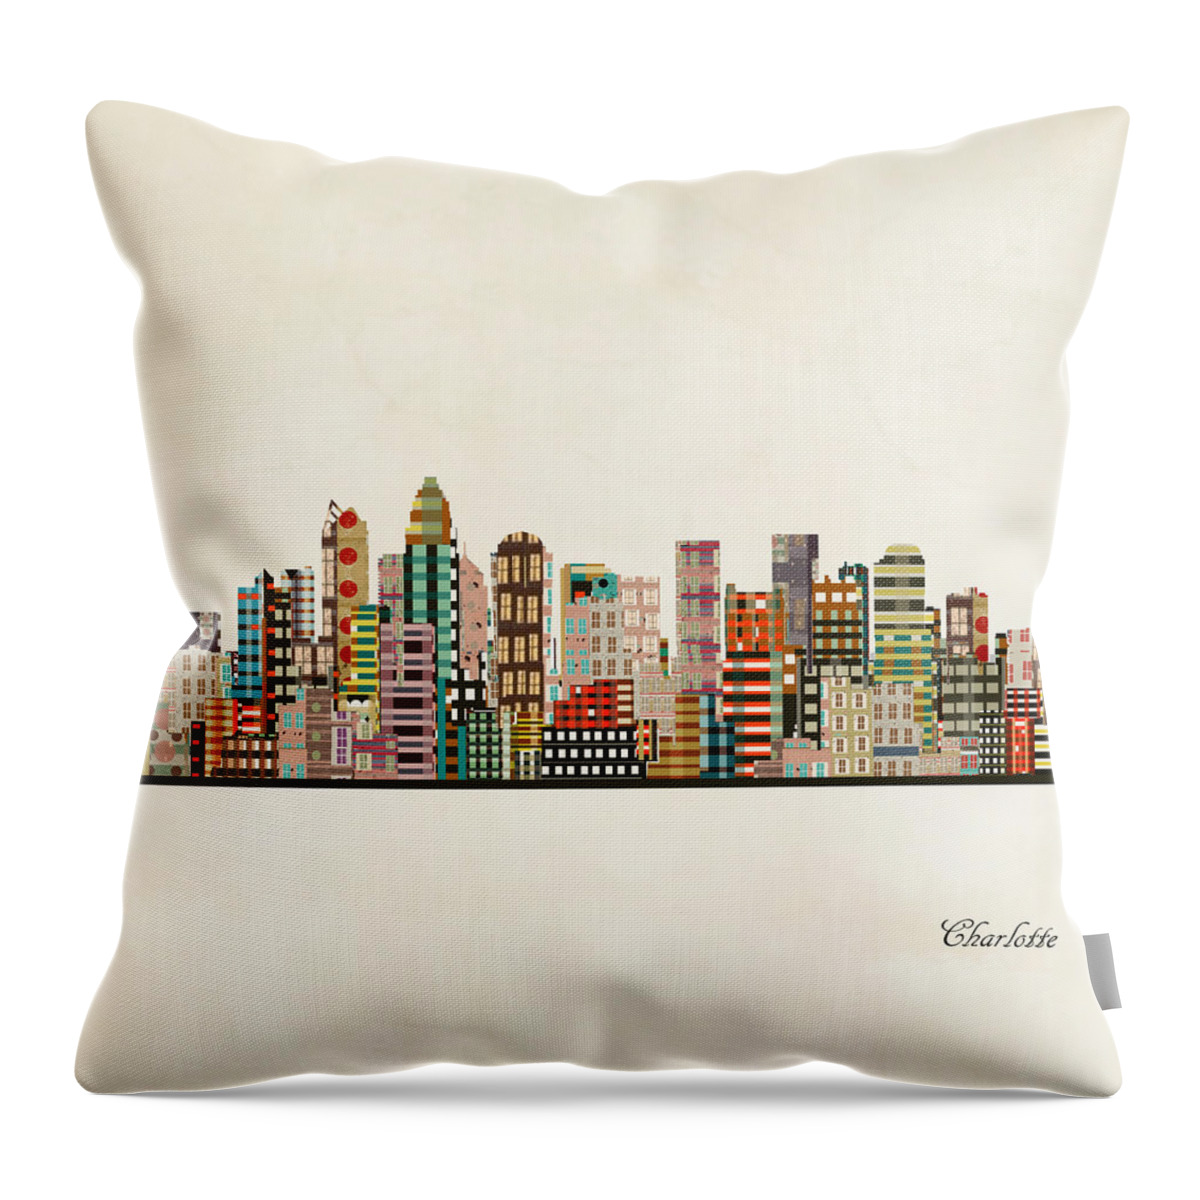 Charlotte Skyline Throw Pillow featuring the painting Charlotte North Carolina by Bri Buckley